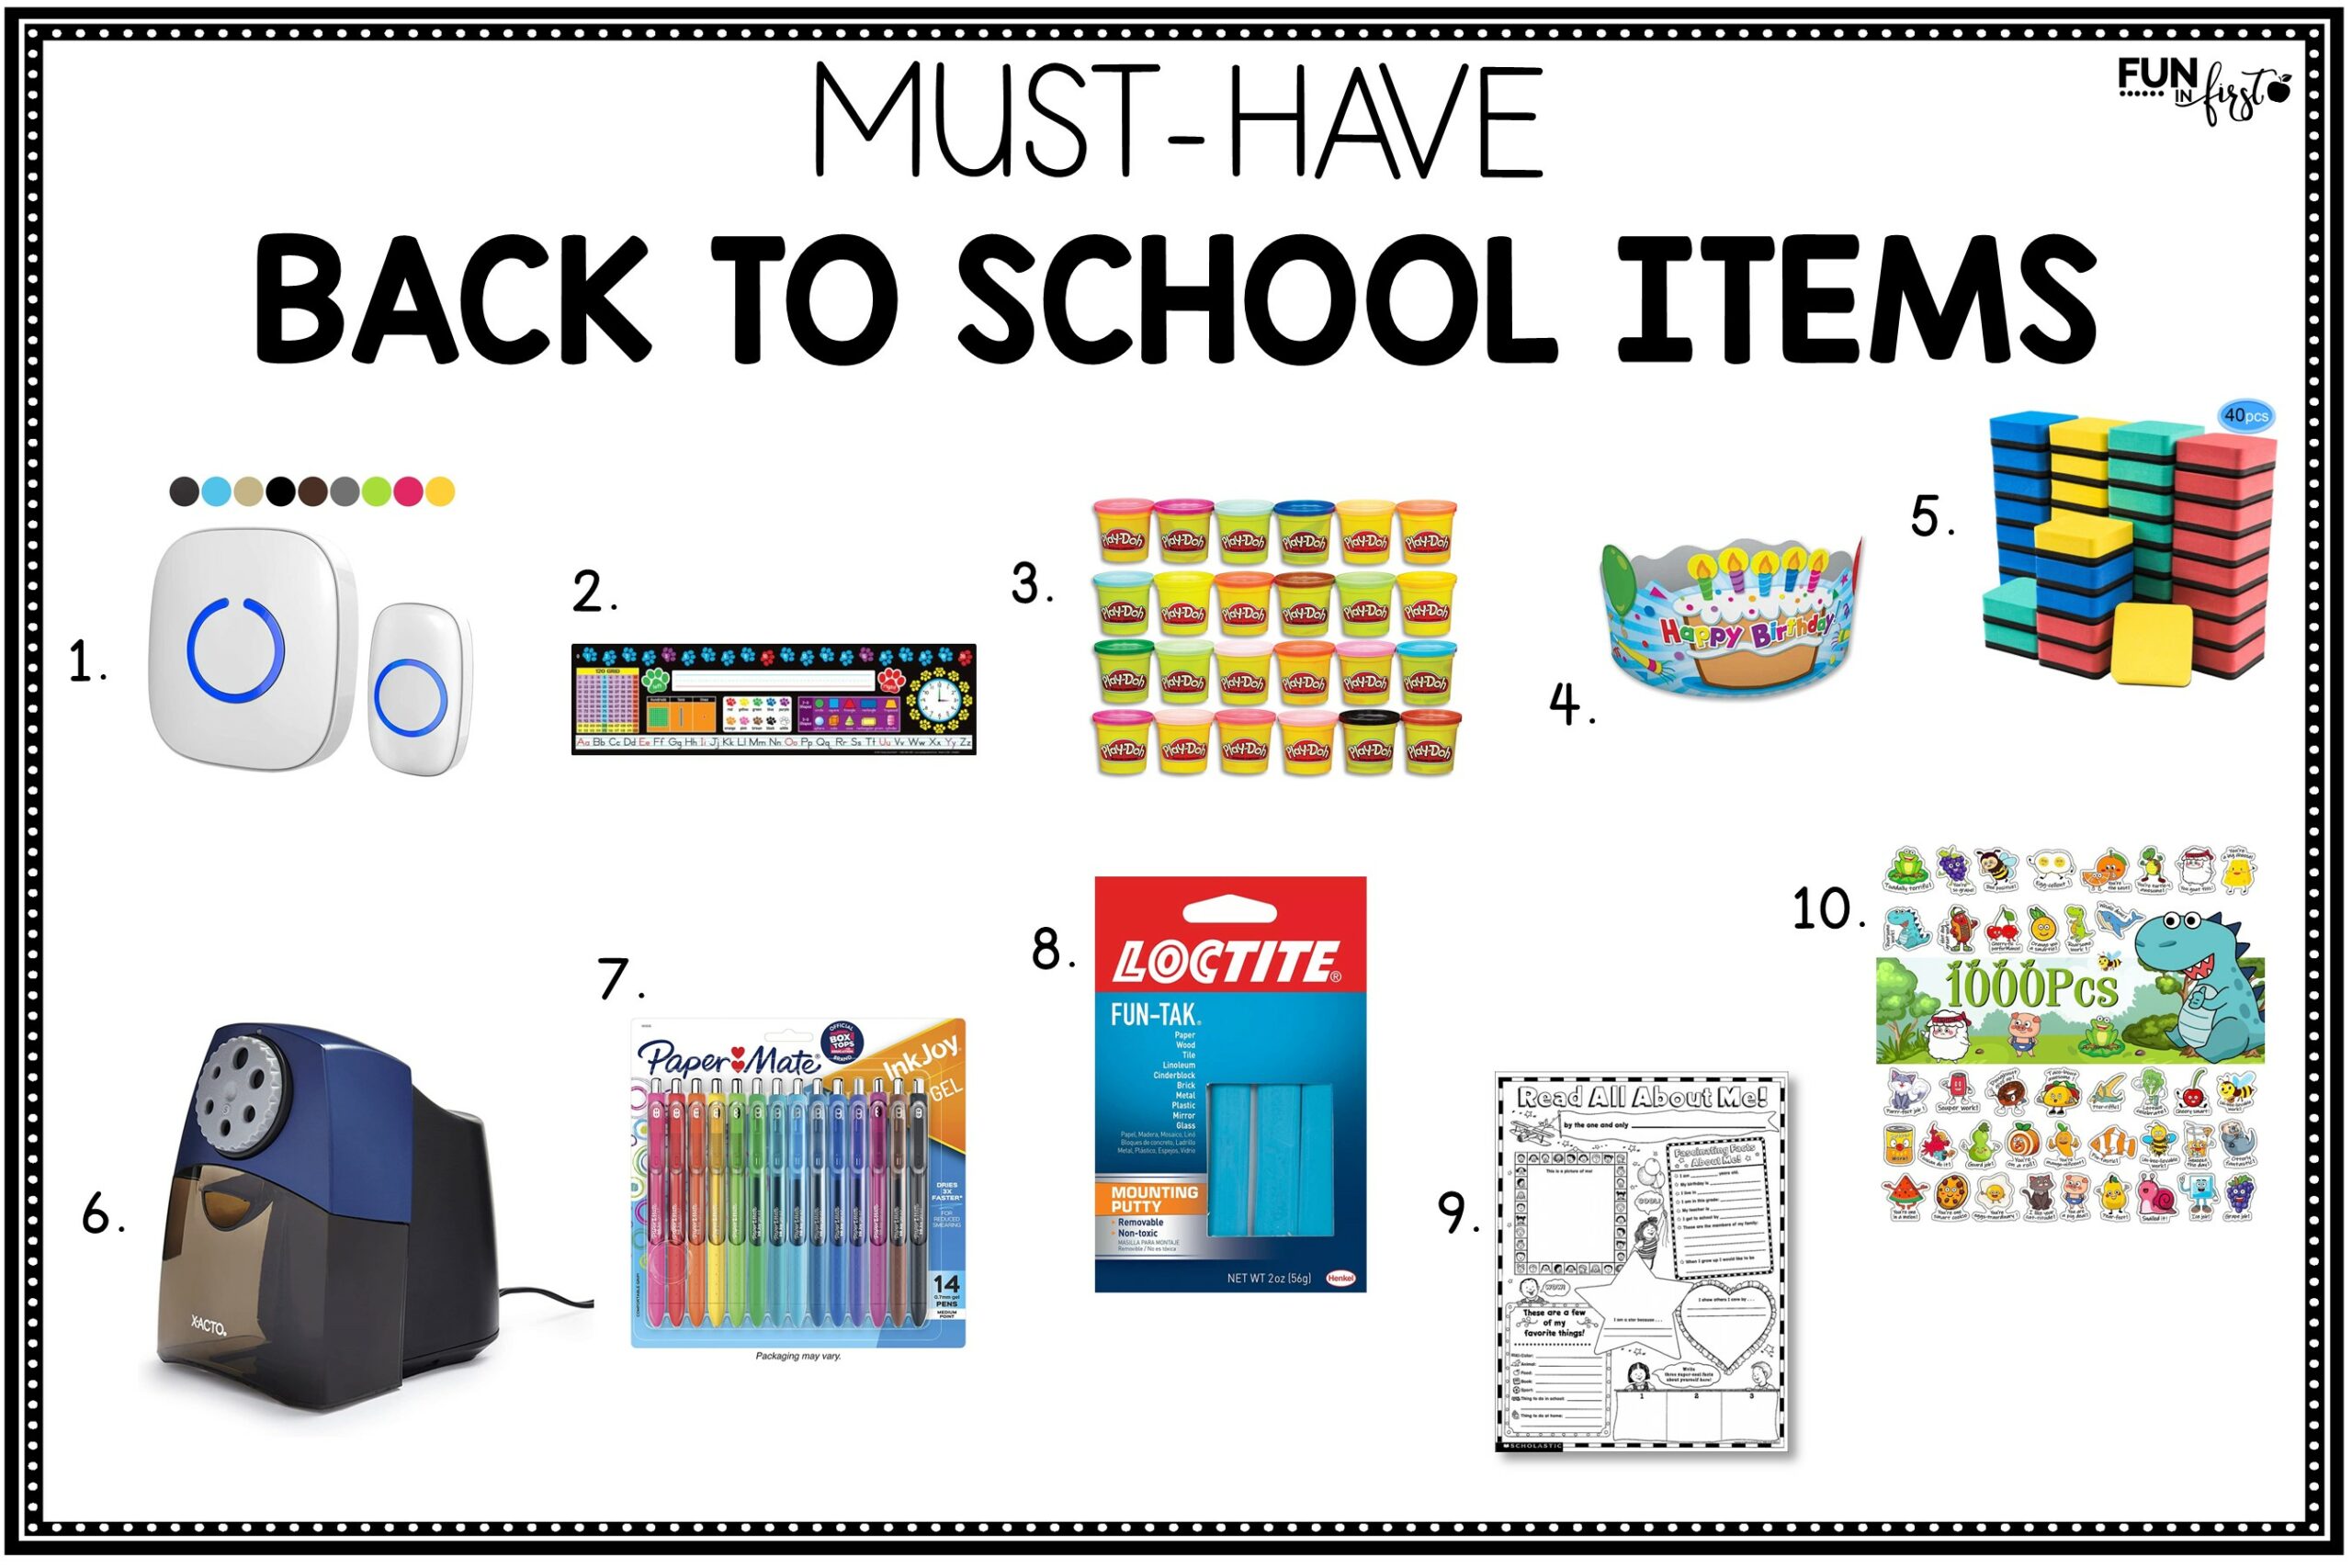 Classroom Must-Haves for Back to School